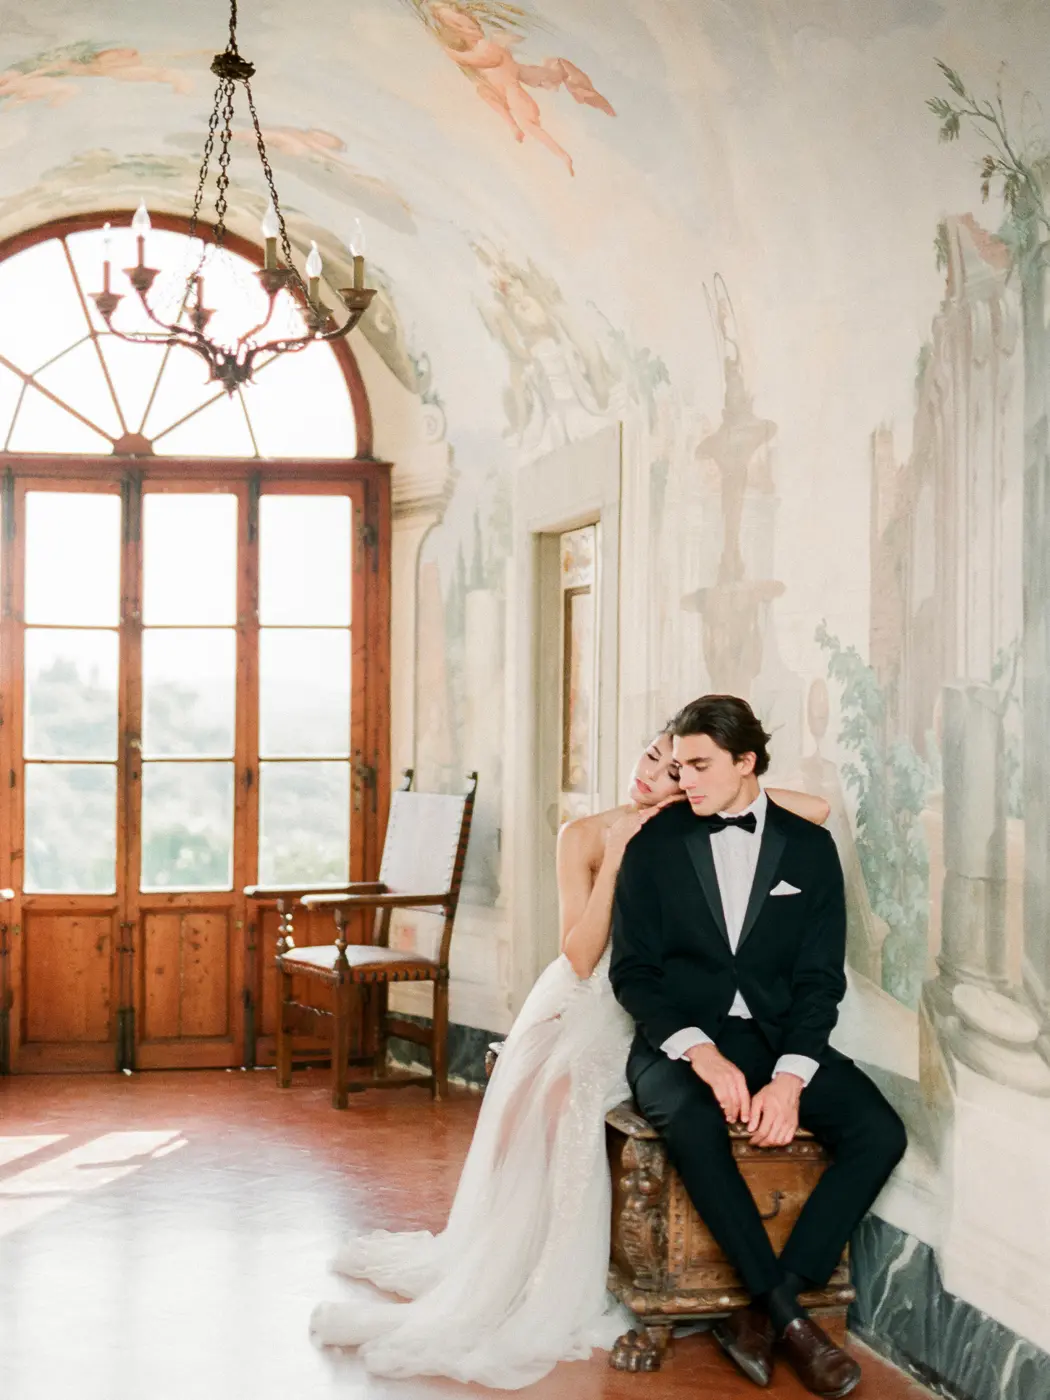 A candid moment of the newlyweds hugs at the luxury medieval villa with frescoes on the walls